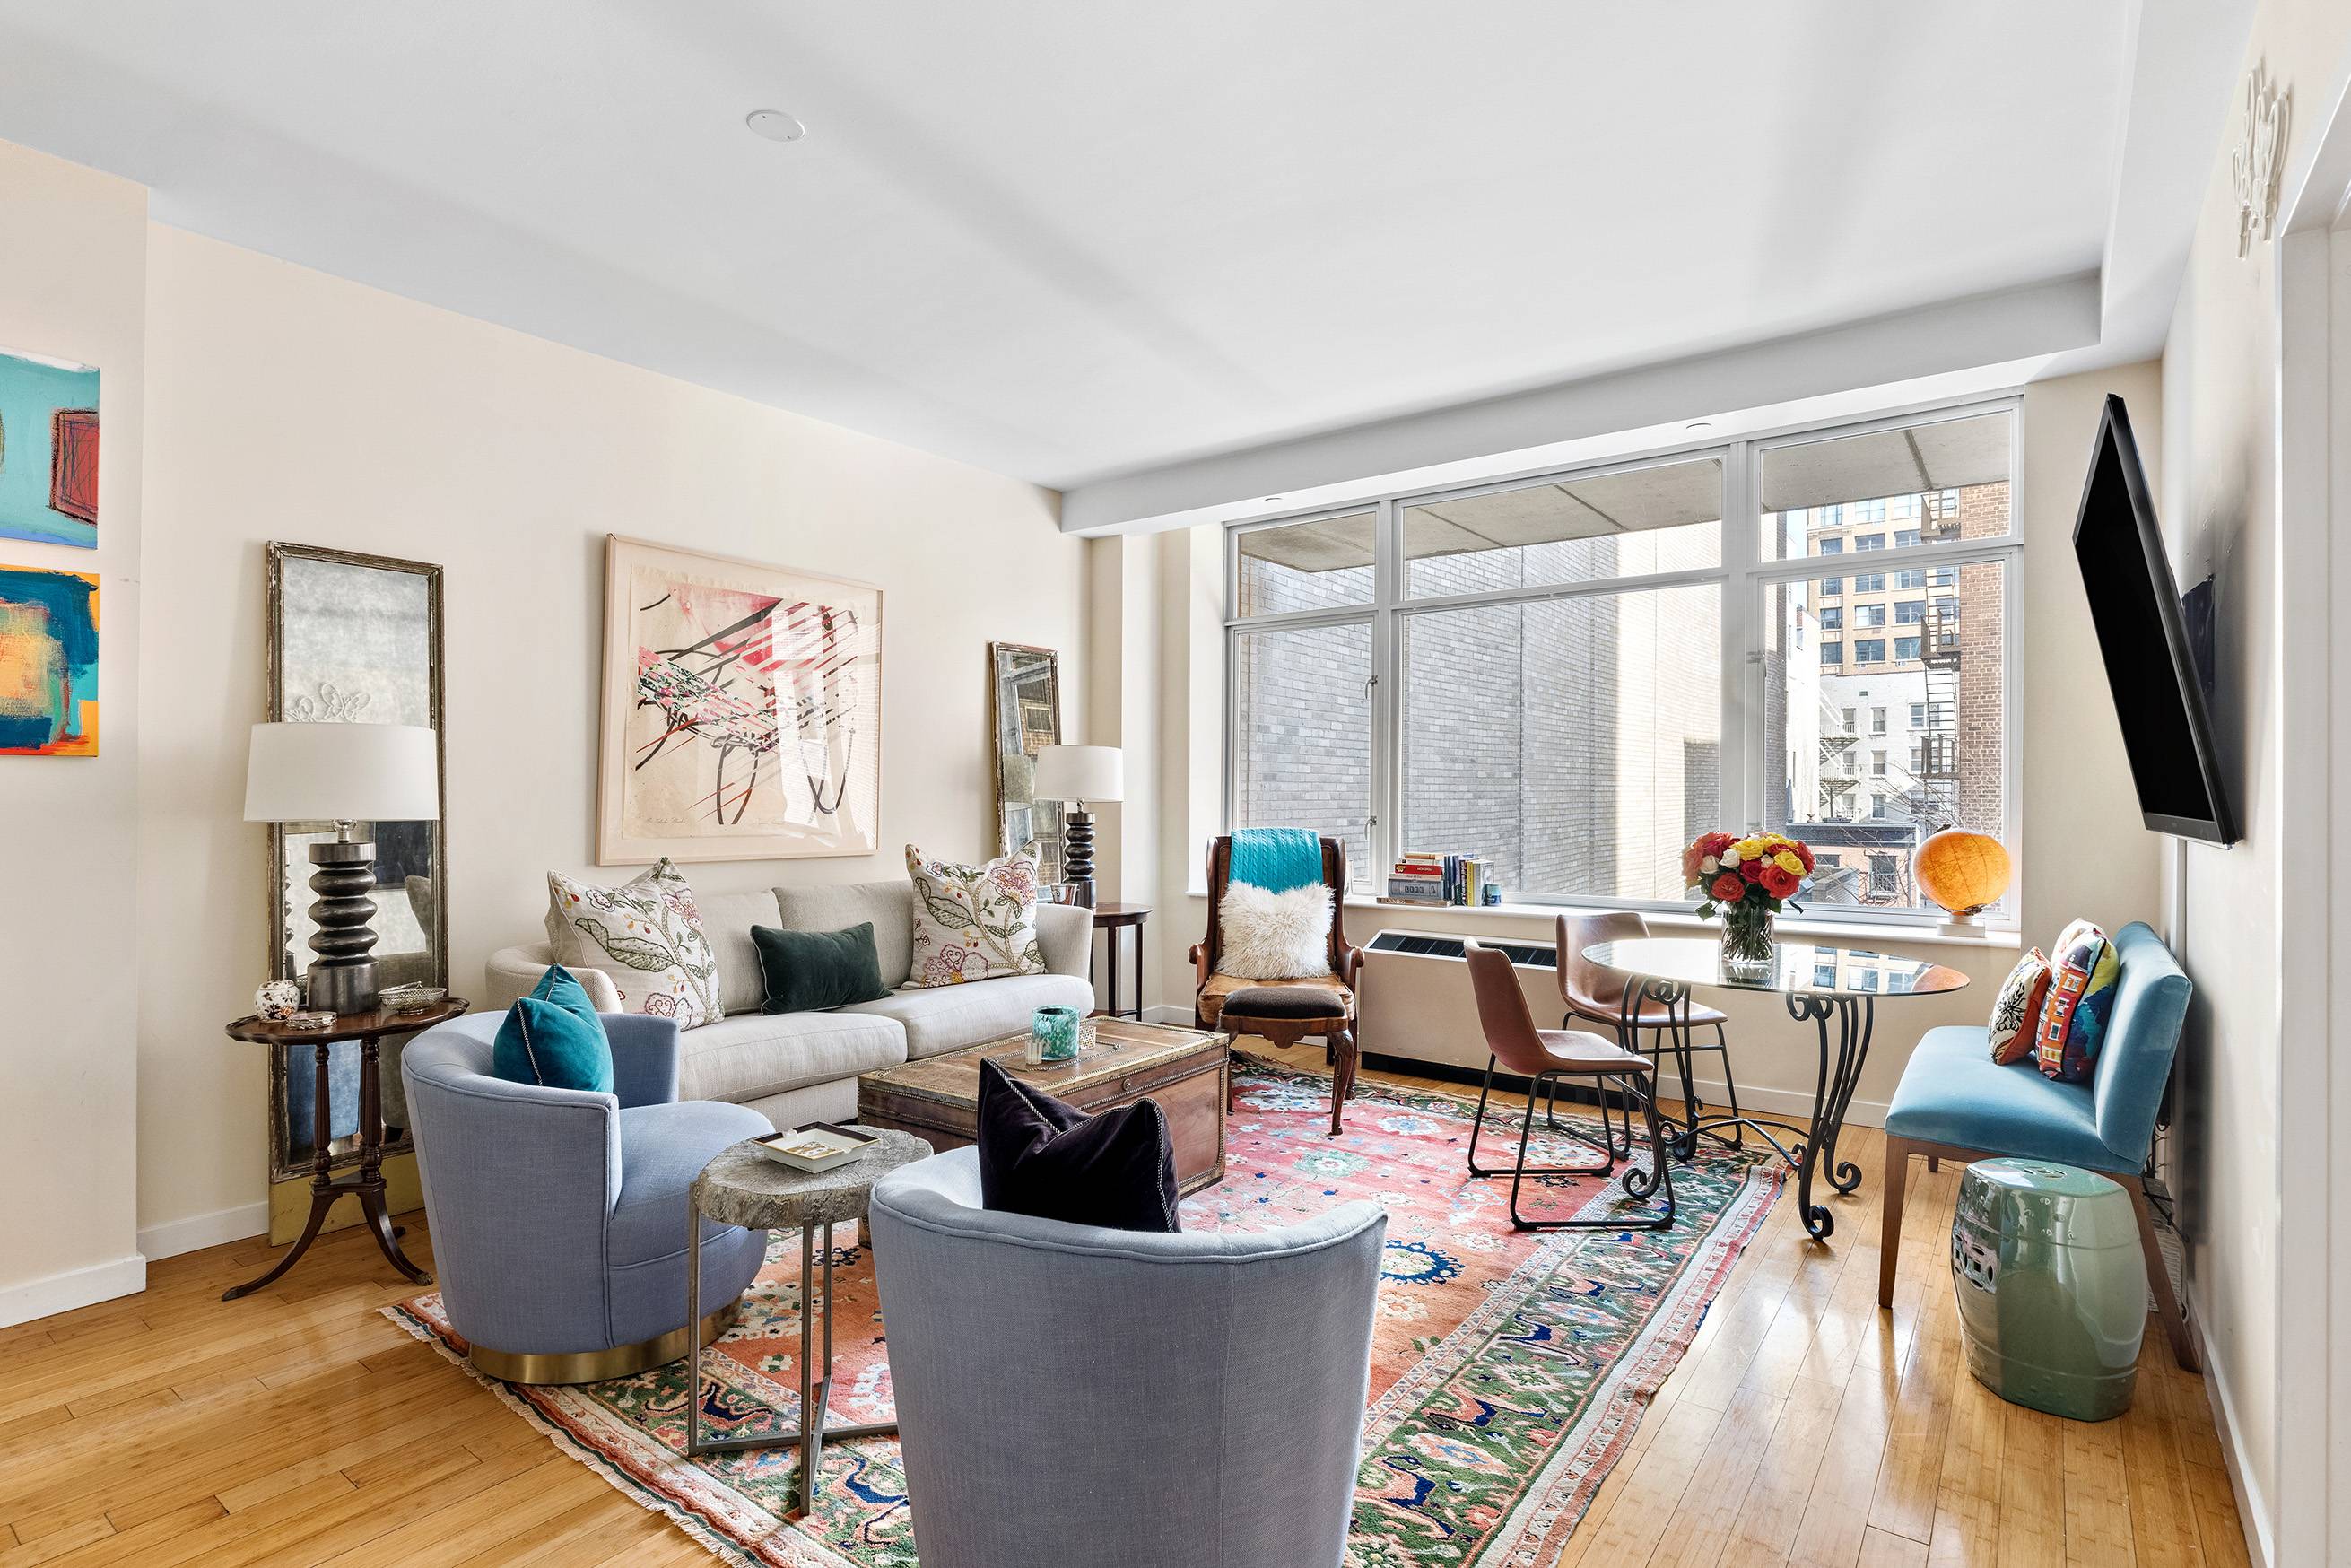 This fabulous 2 bedroom 2bath home at the crossroads of Chelsea and the West Village is located in a 24 hour Doorman Boutique Condo with only 4 apartments per floor.